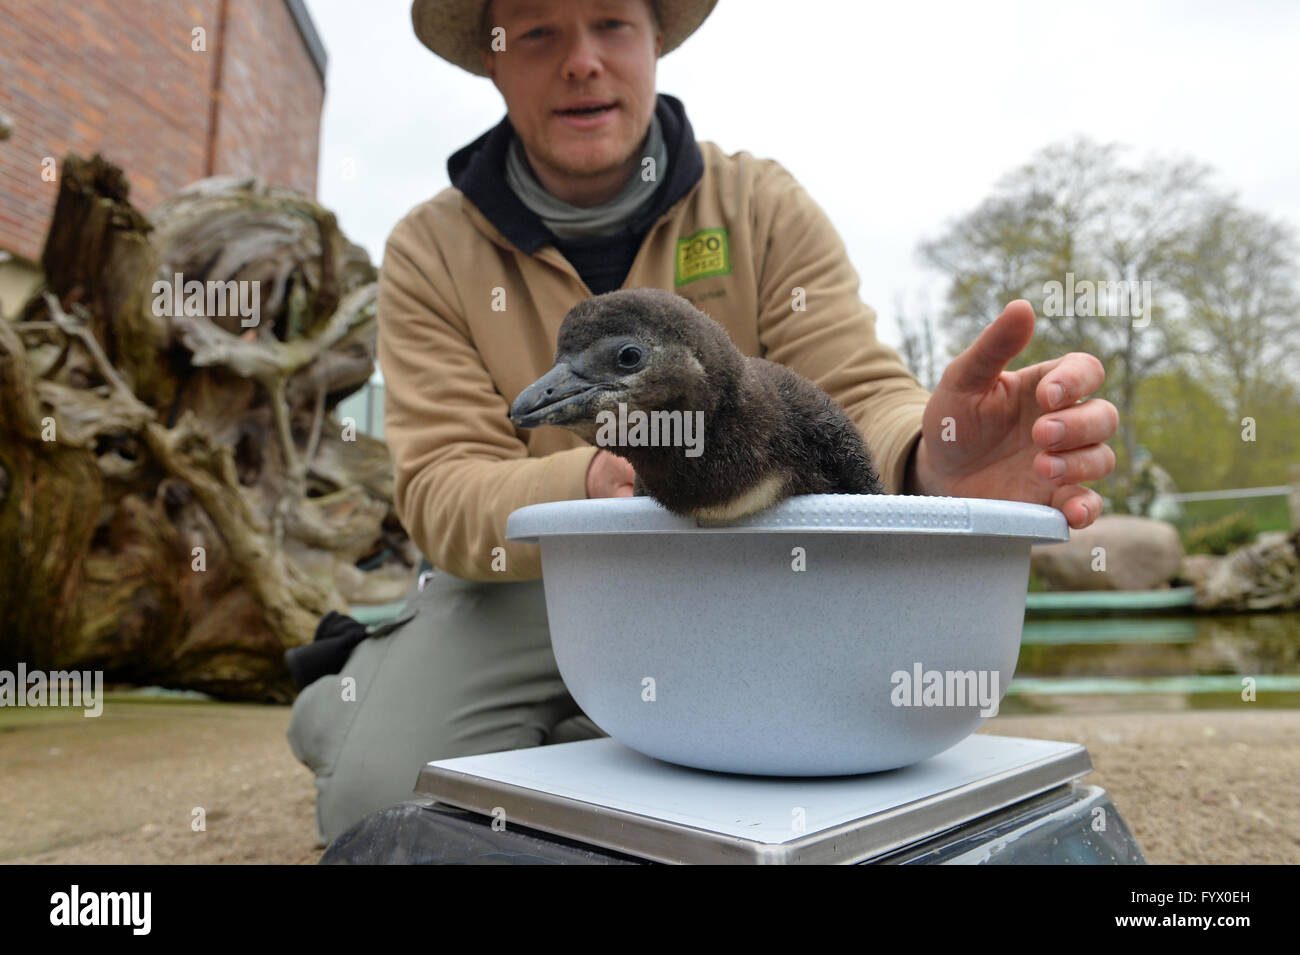 Leipzig, Germany. 28th Apr, 2016. In the custody of zookeeper Christoph Urban, the five-week-old African penguin offspring is placed on a scale in the zoo in Leipzig, Germany, 28 April 2016. The penguin, whose gender is still unknown, weighs 1,800 grams. Over Ascension weekend (05 until 08 May), the Leipzig Zoo is dedicating its program 'Young Animal Discovery Days' to its animal offspring. Visitors can watch the penguin being weighed (05 and 07 May 10:15AM) or visit with the young anoa. Photo: HENDRIK SCHMIDT/ZB/dpa/Alamy Live News Stock Photo